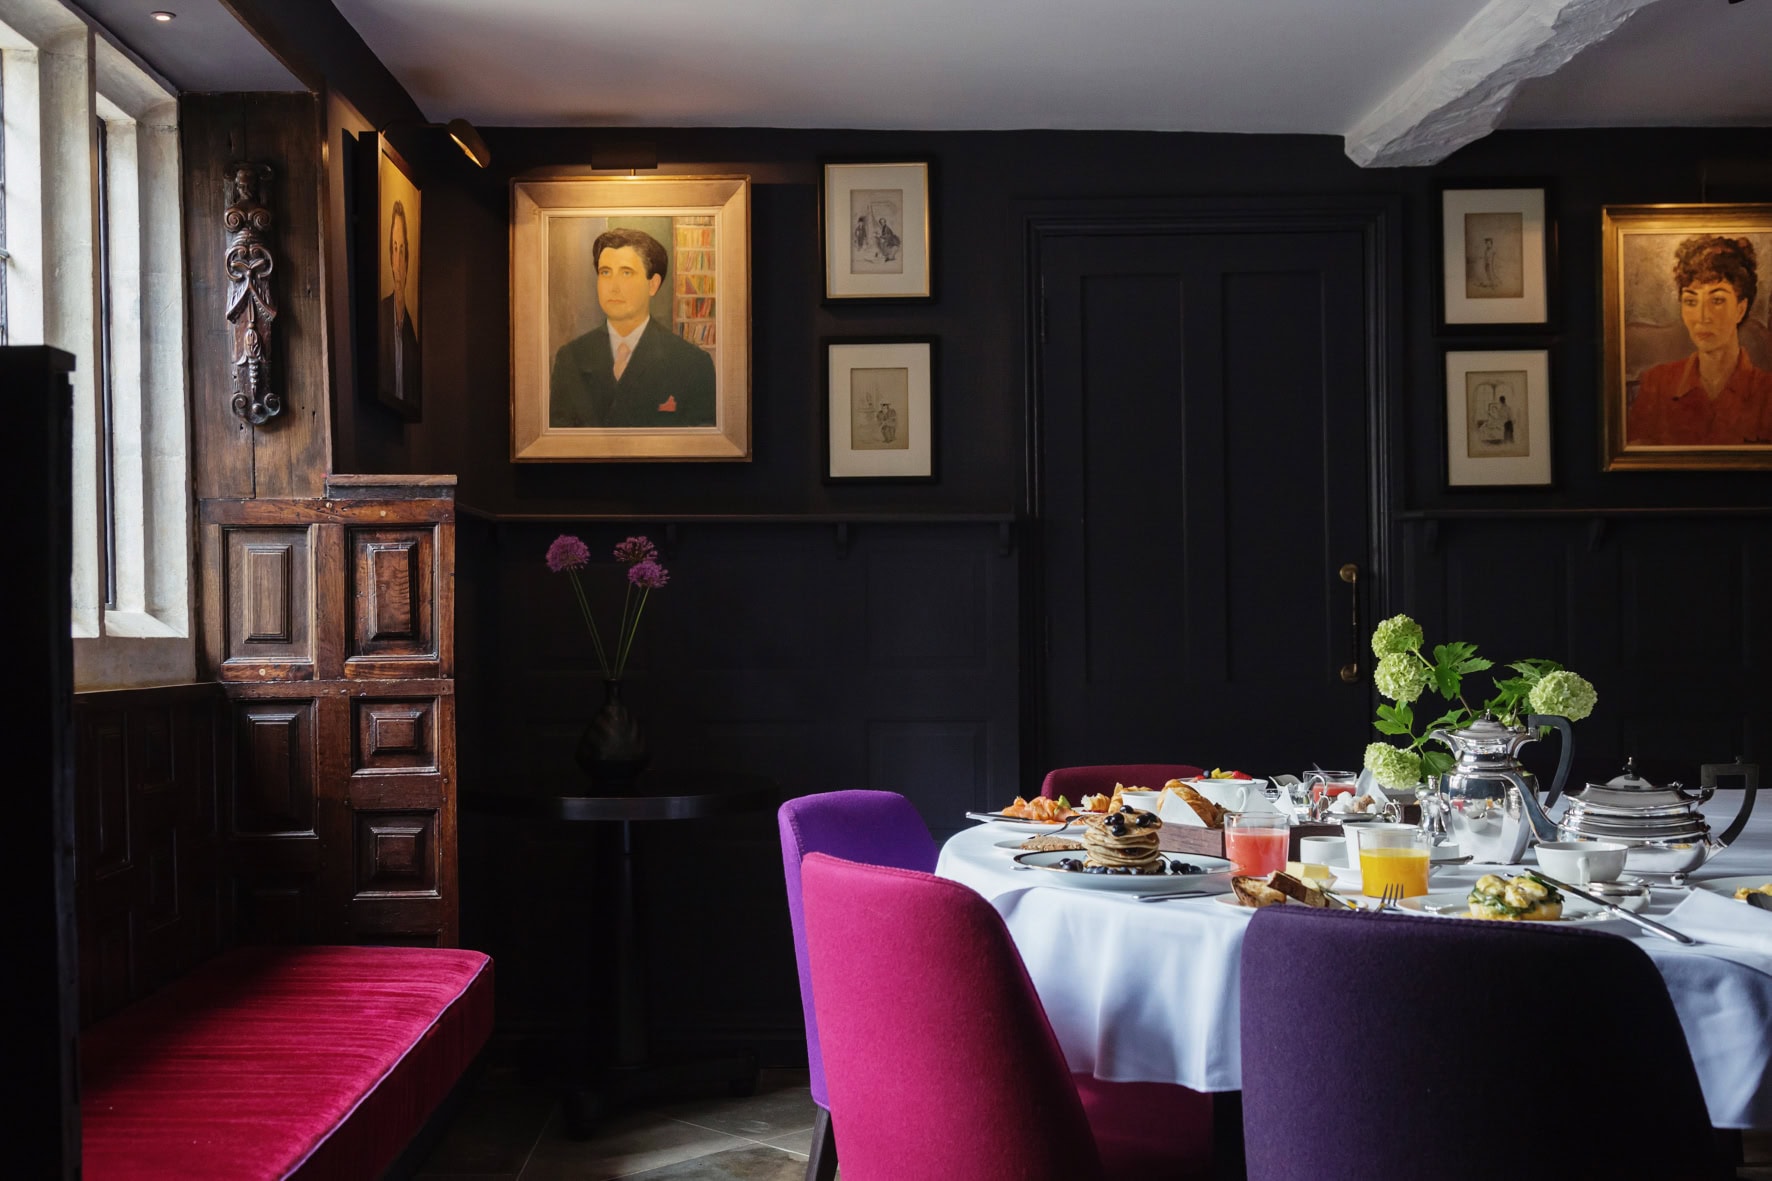 0009 - 2014 - Old Parsonage Hotel - Oxford - Low Res - Pike Room Private Dining Breakfast - Web Hero